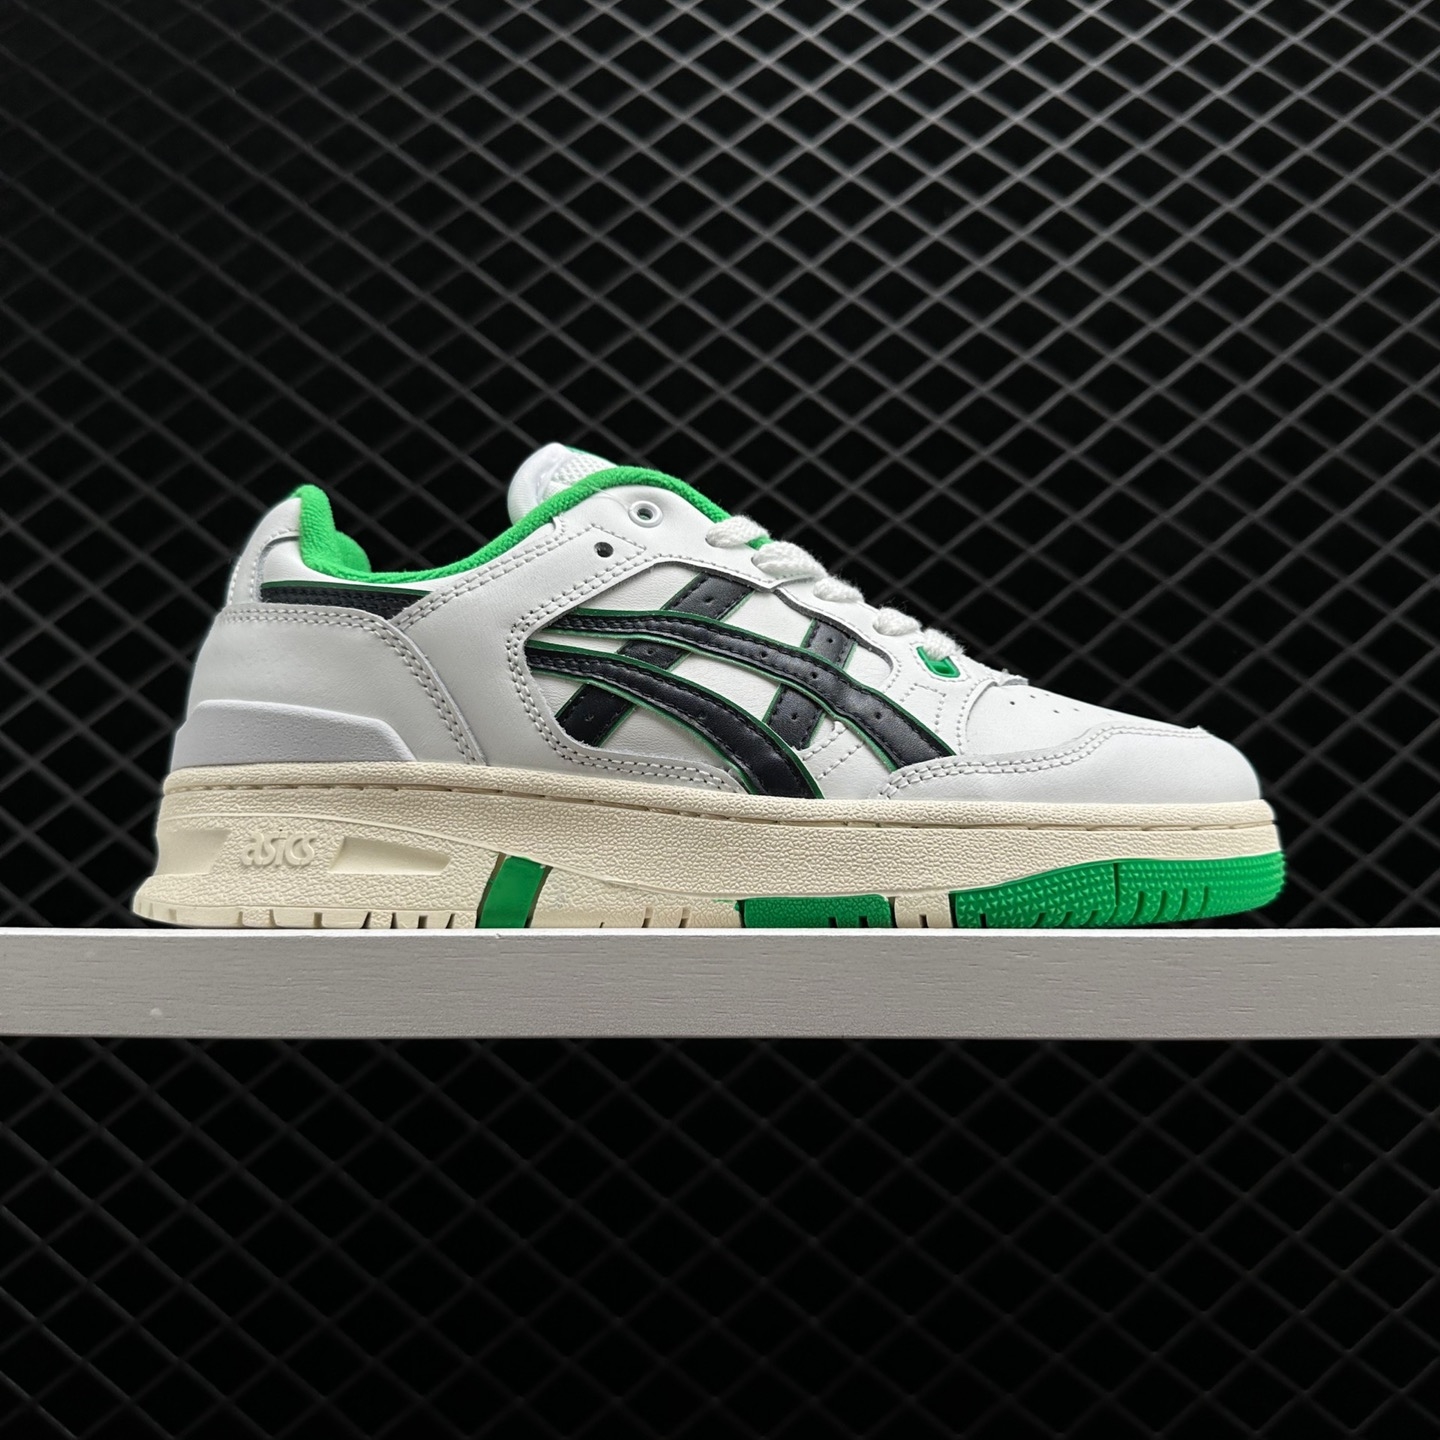 Asics EX89 'Celtics' 1201A476-106 - Stylish and Comfortable Athletic Sneakers